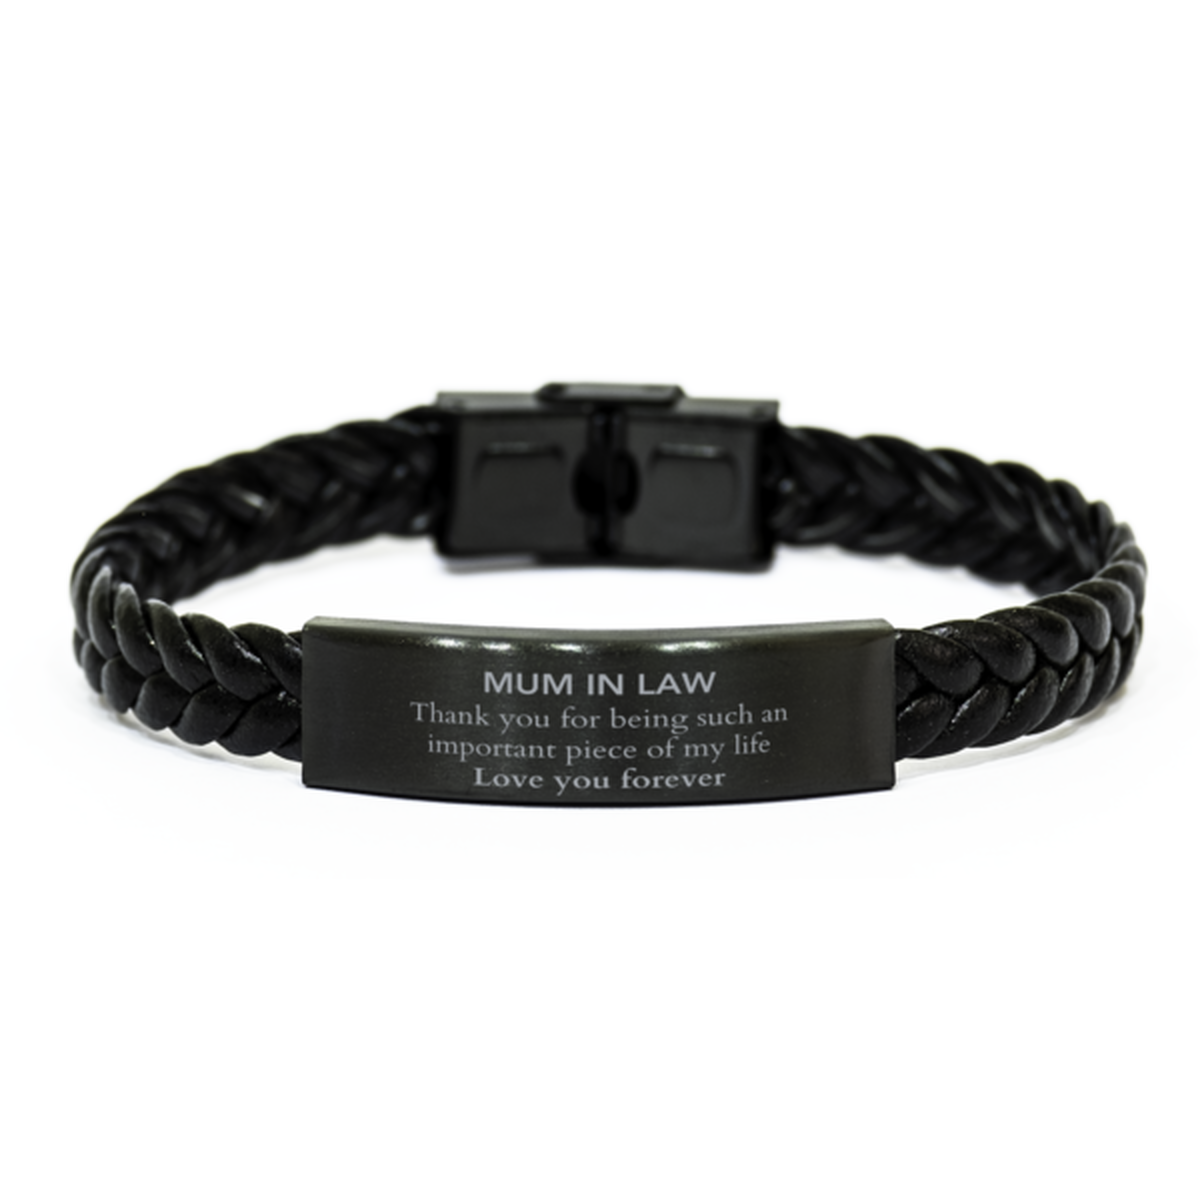 Appropriate Mum In Law  Braided Leather Bracelet Epic Birthday Gifts for Mum In Law  Thank you for being such an important piece of my life Mum In Law  Christmas Mothers Fathers Day